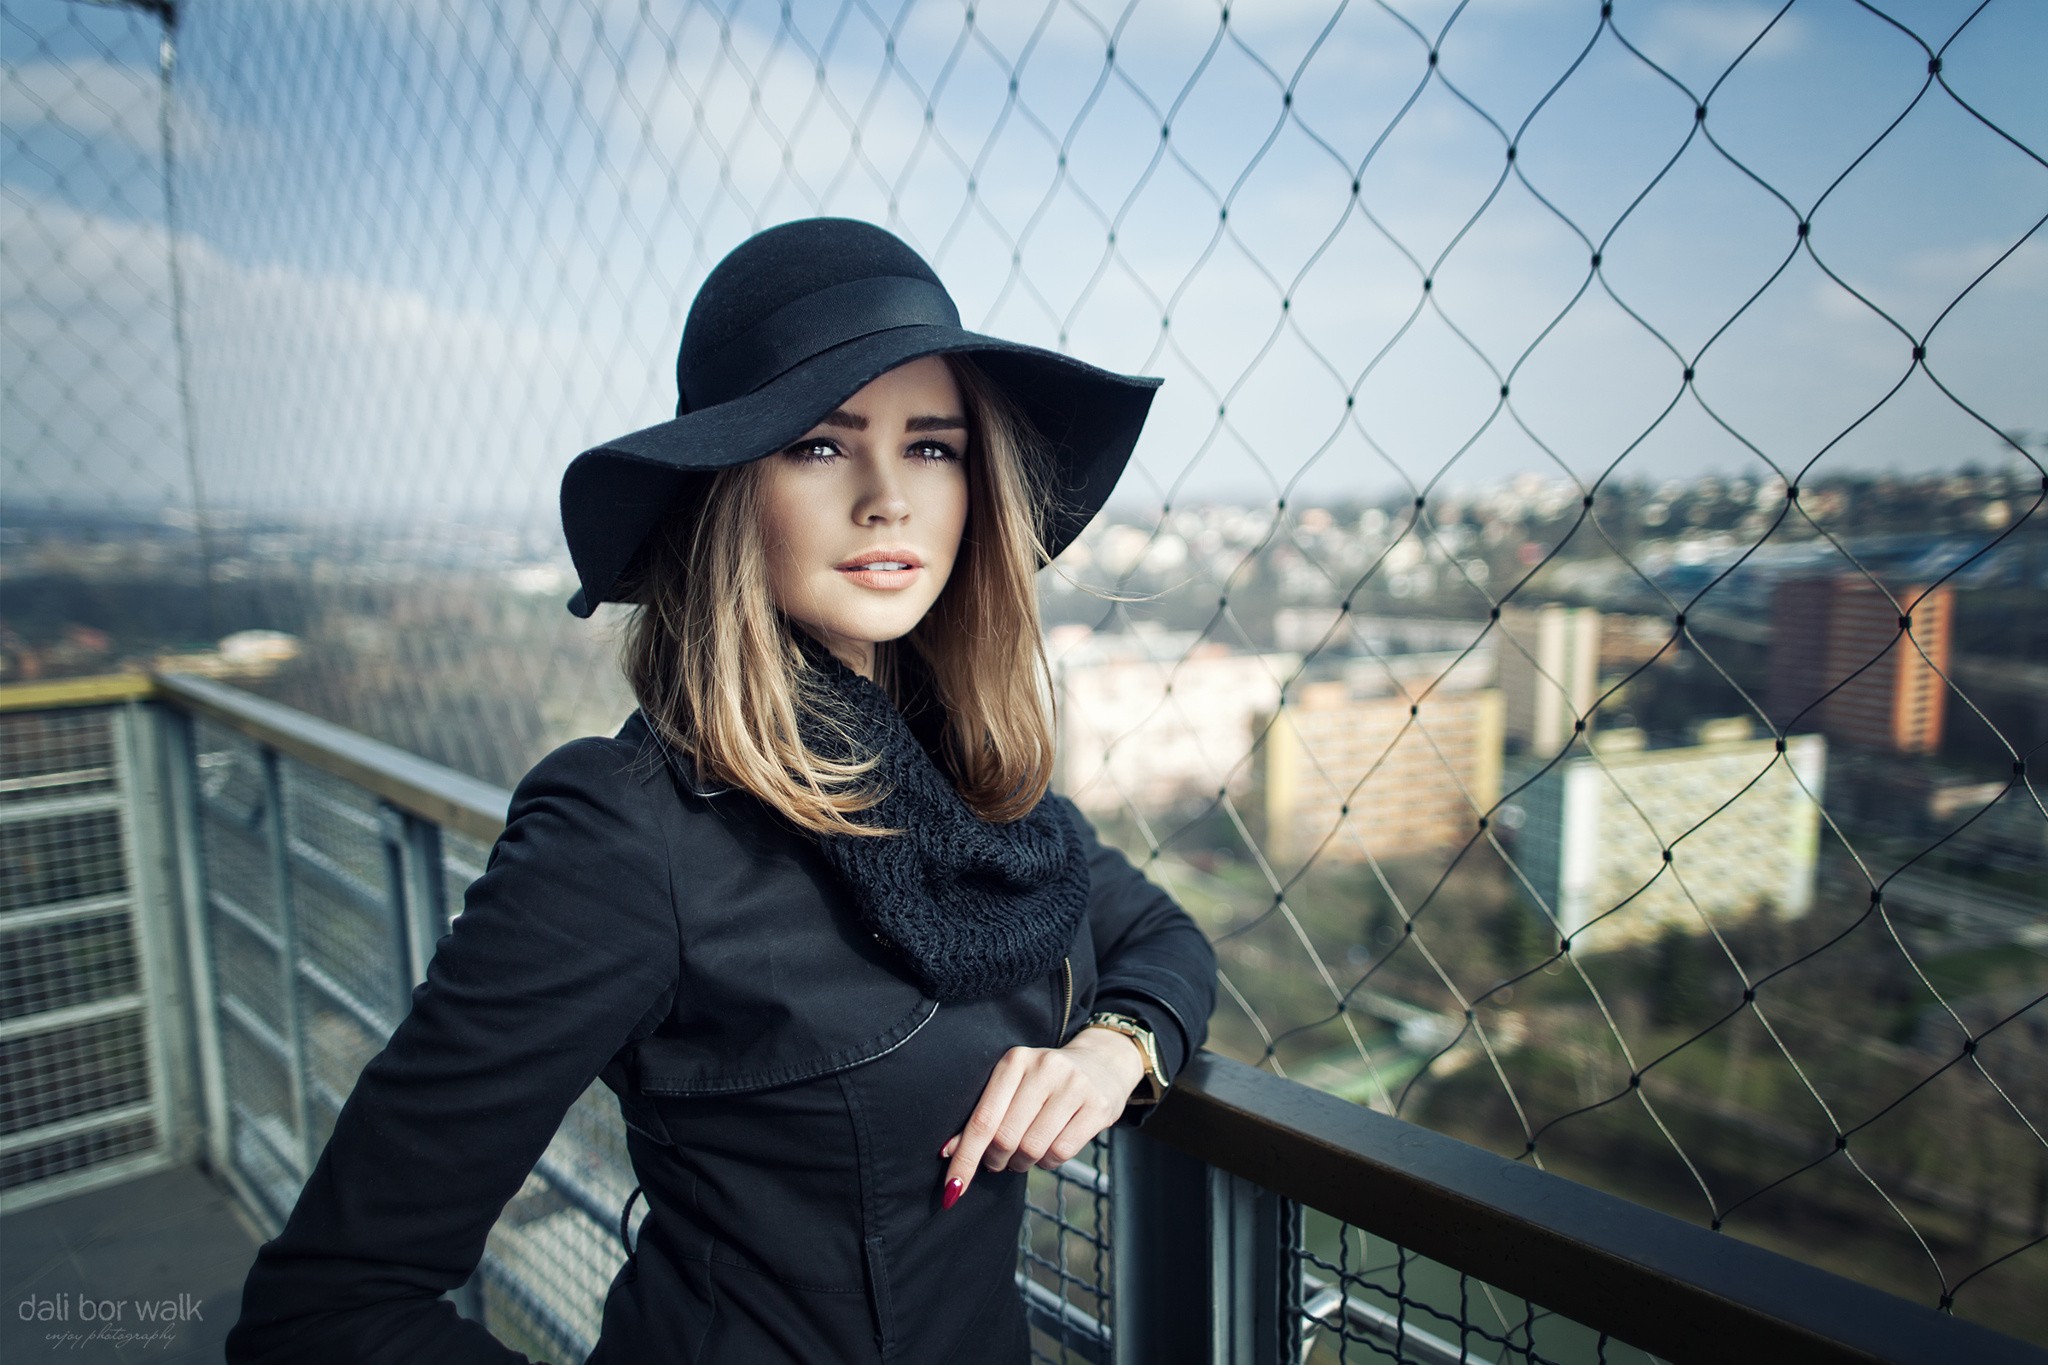 People 2048x1365 women blonde brown eyes face portrait black clothing hat women outdoors red nails rooftops depth of field millinery classy glamour women with hats watermarked